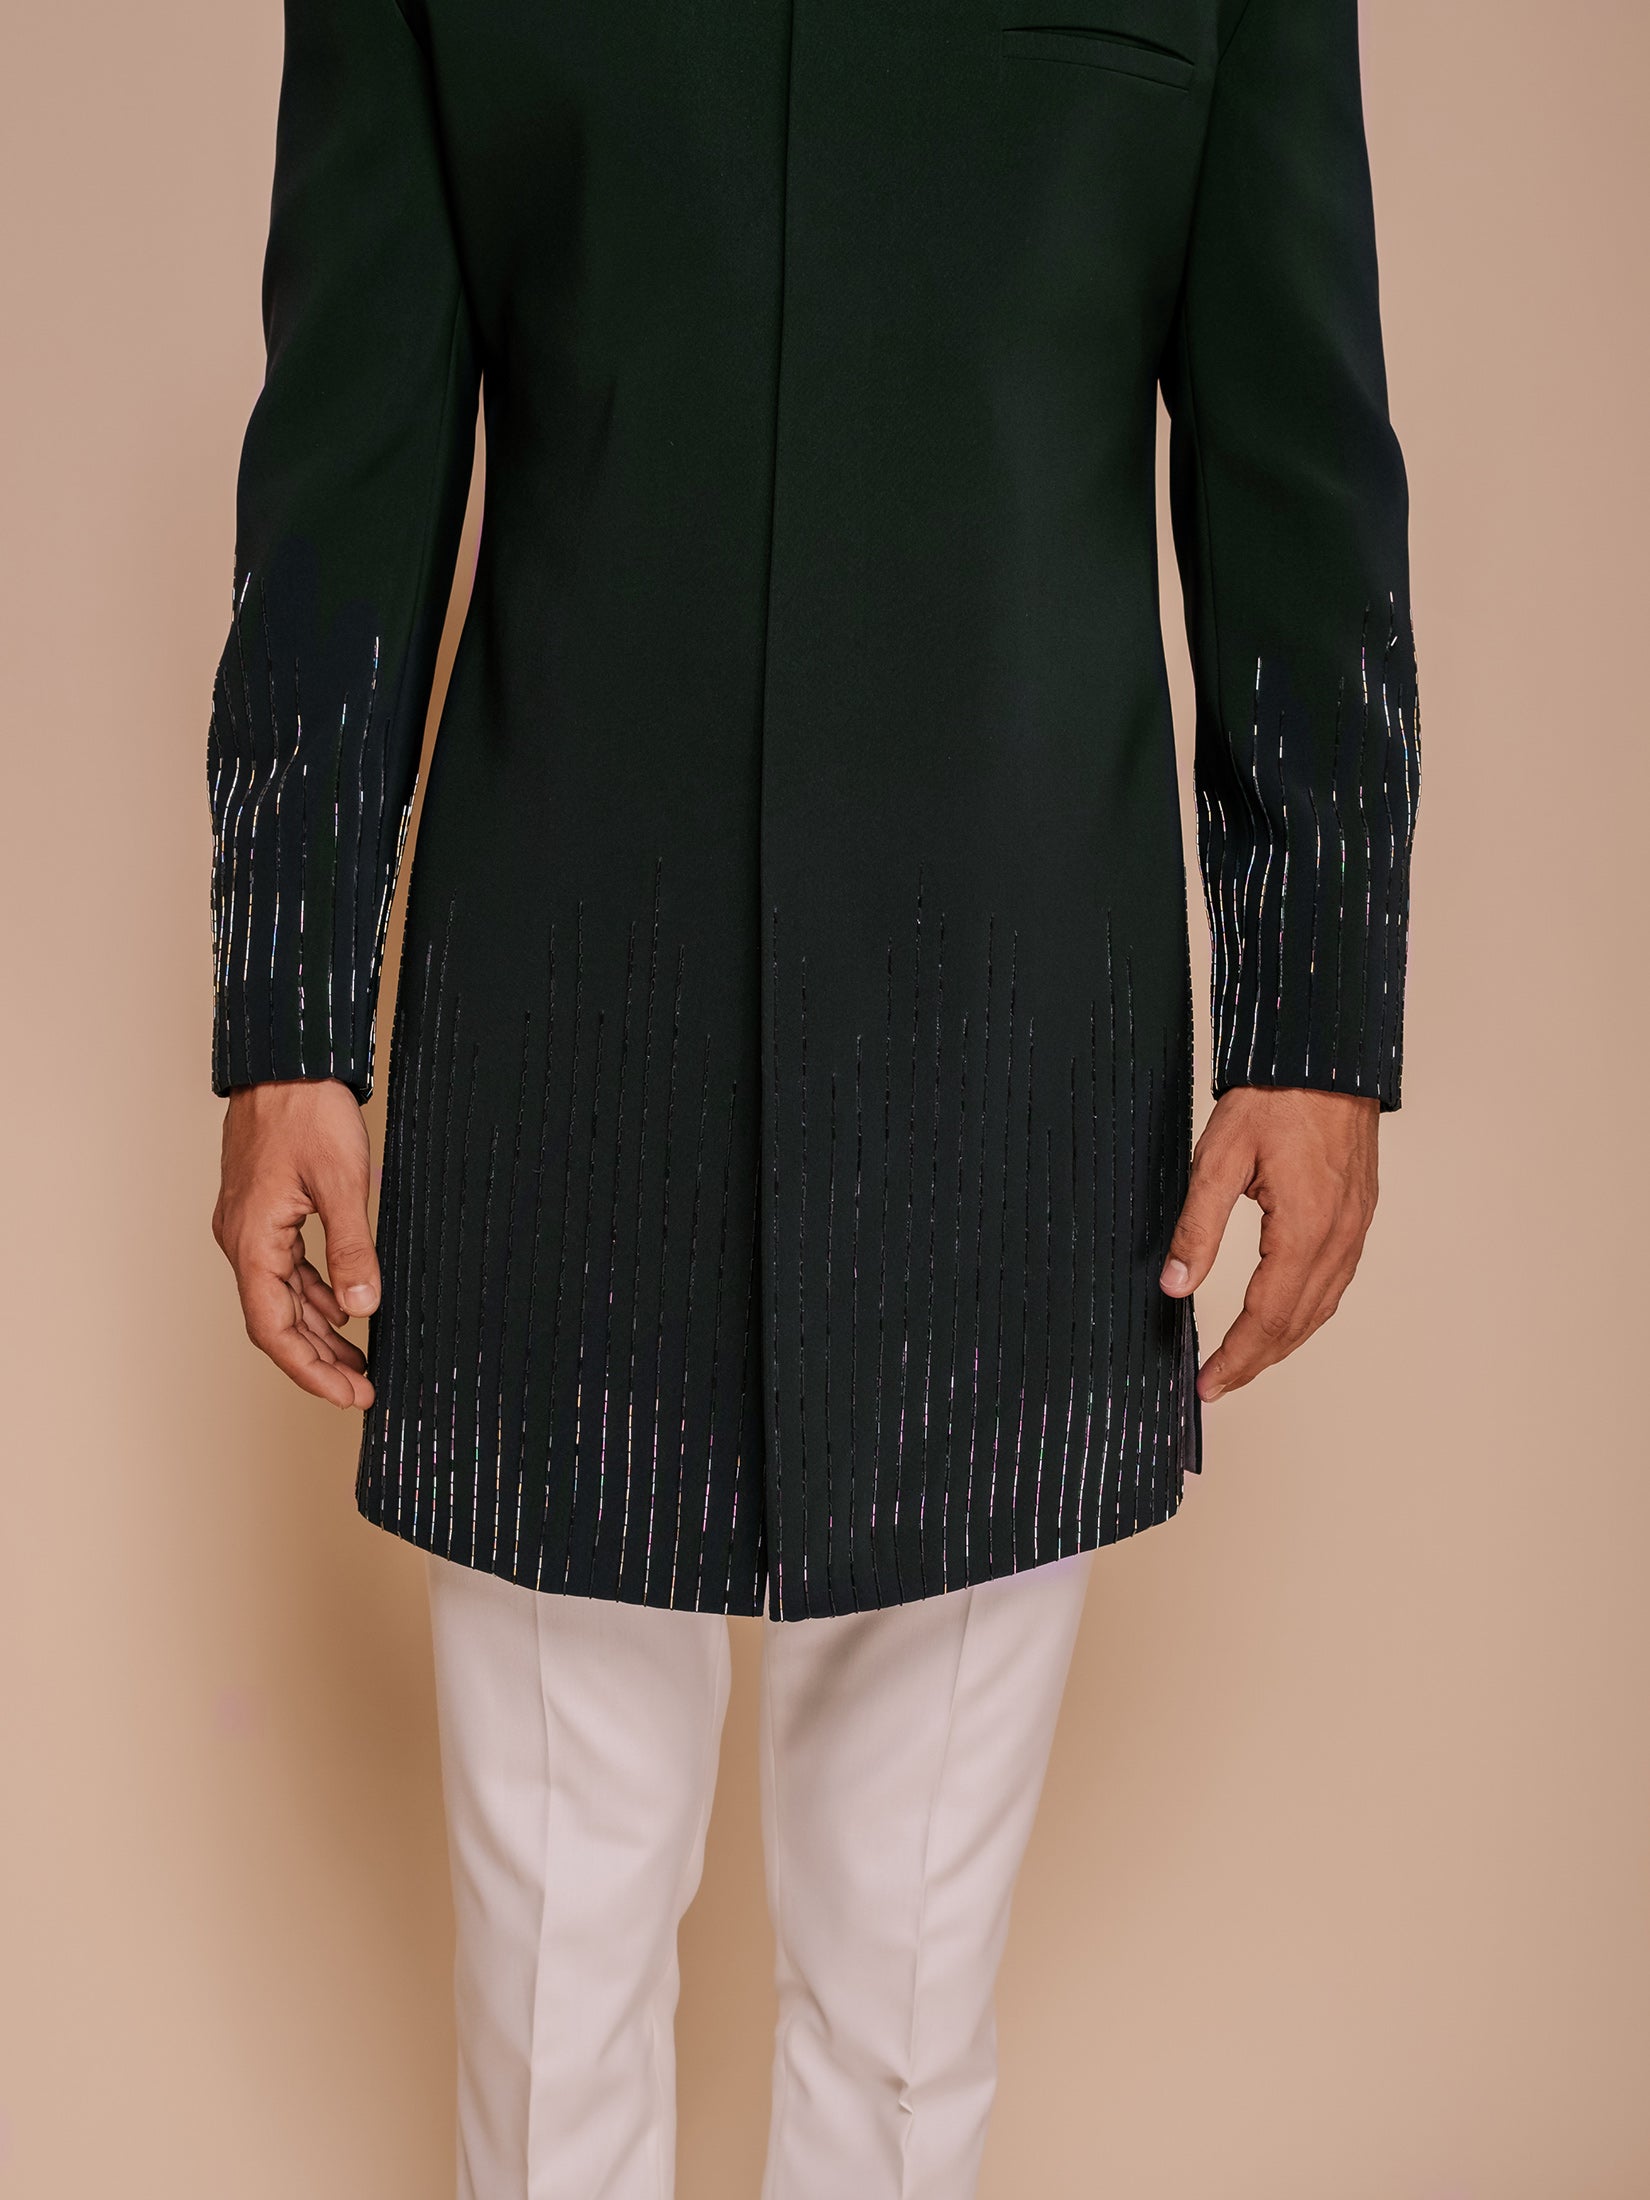 Bottlegreen Indowestern With Embroidered Lines On Sleeve And Hem Paired With Fitted Pants